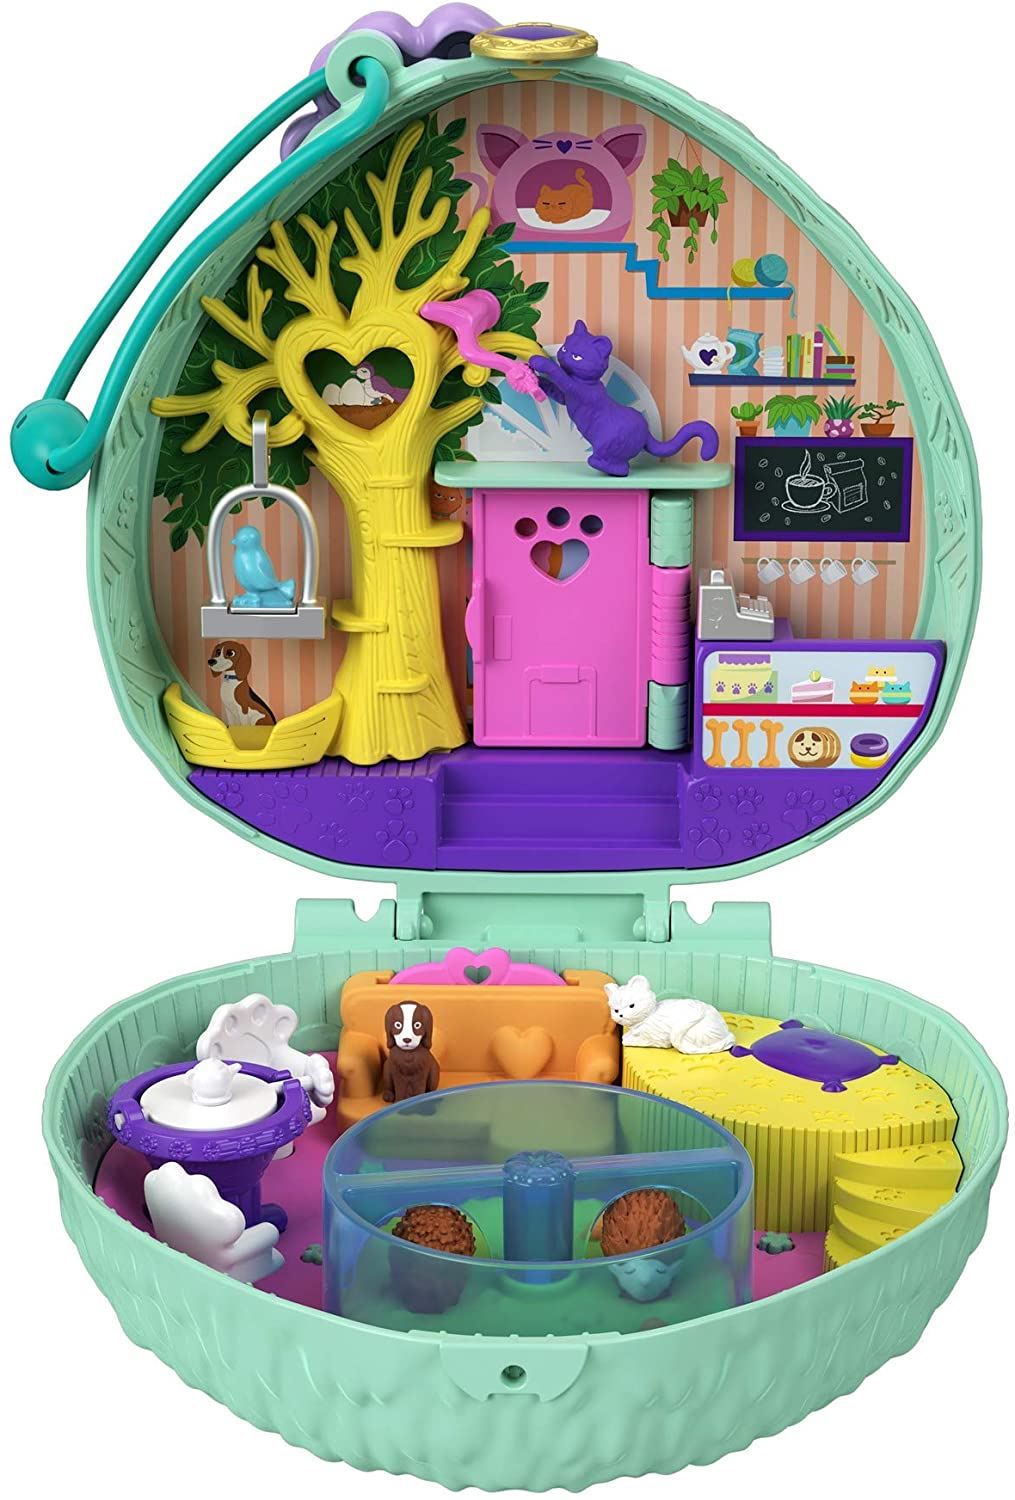 Polly pocket Images, Stock Photos & Vectors | Shutterstock